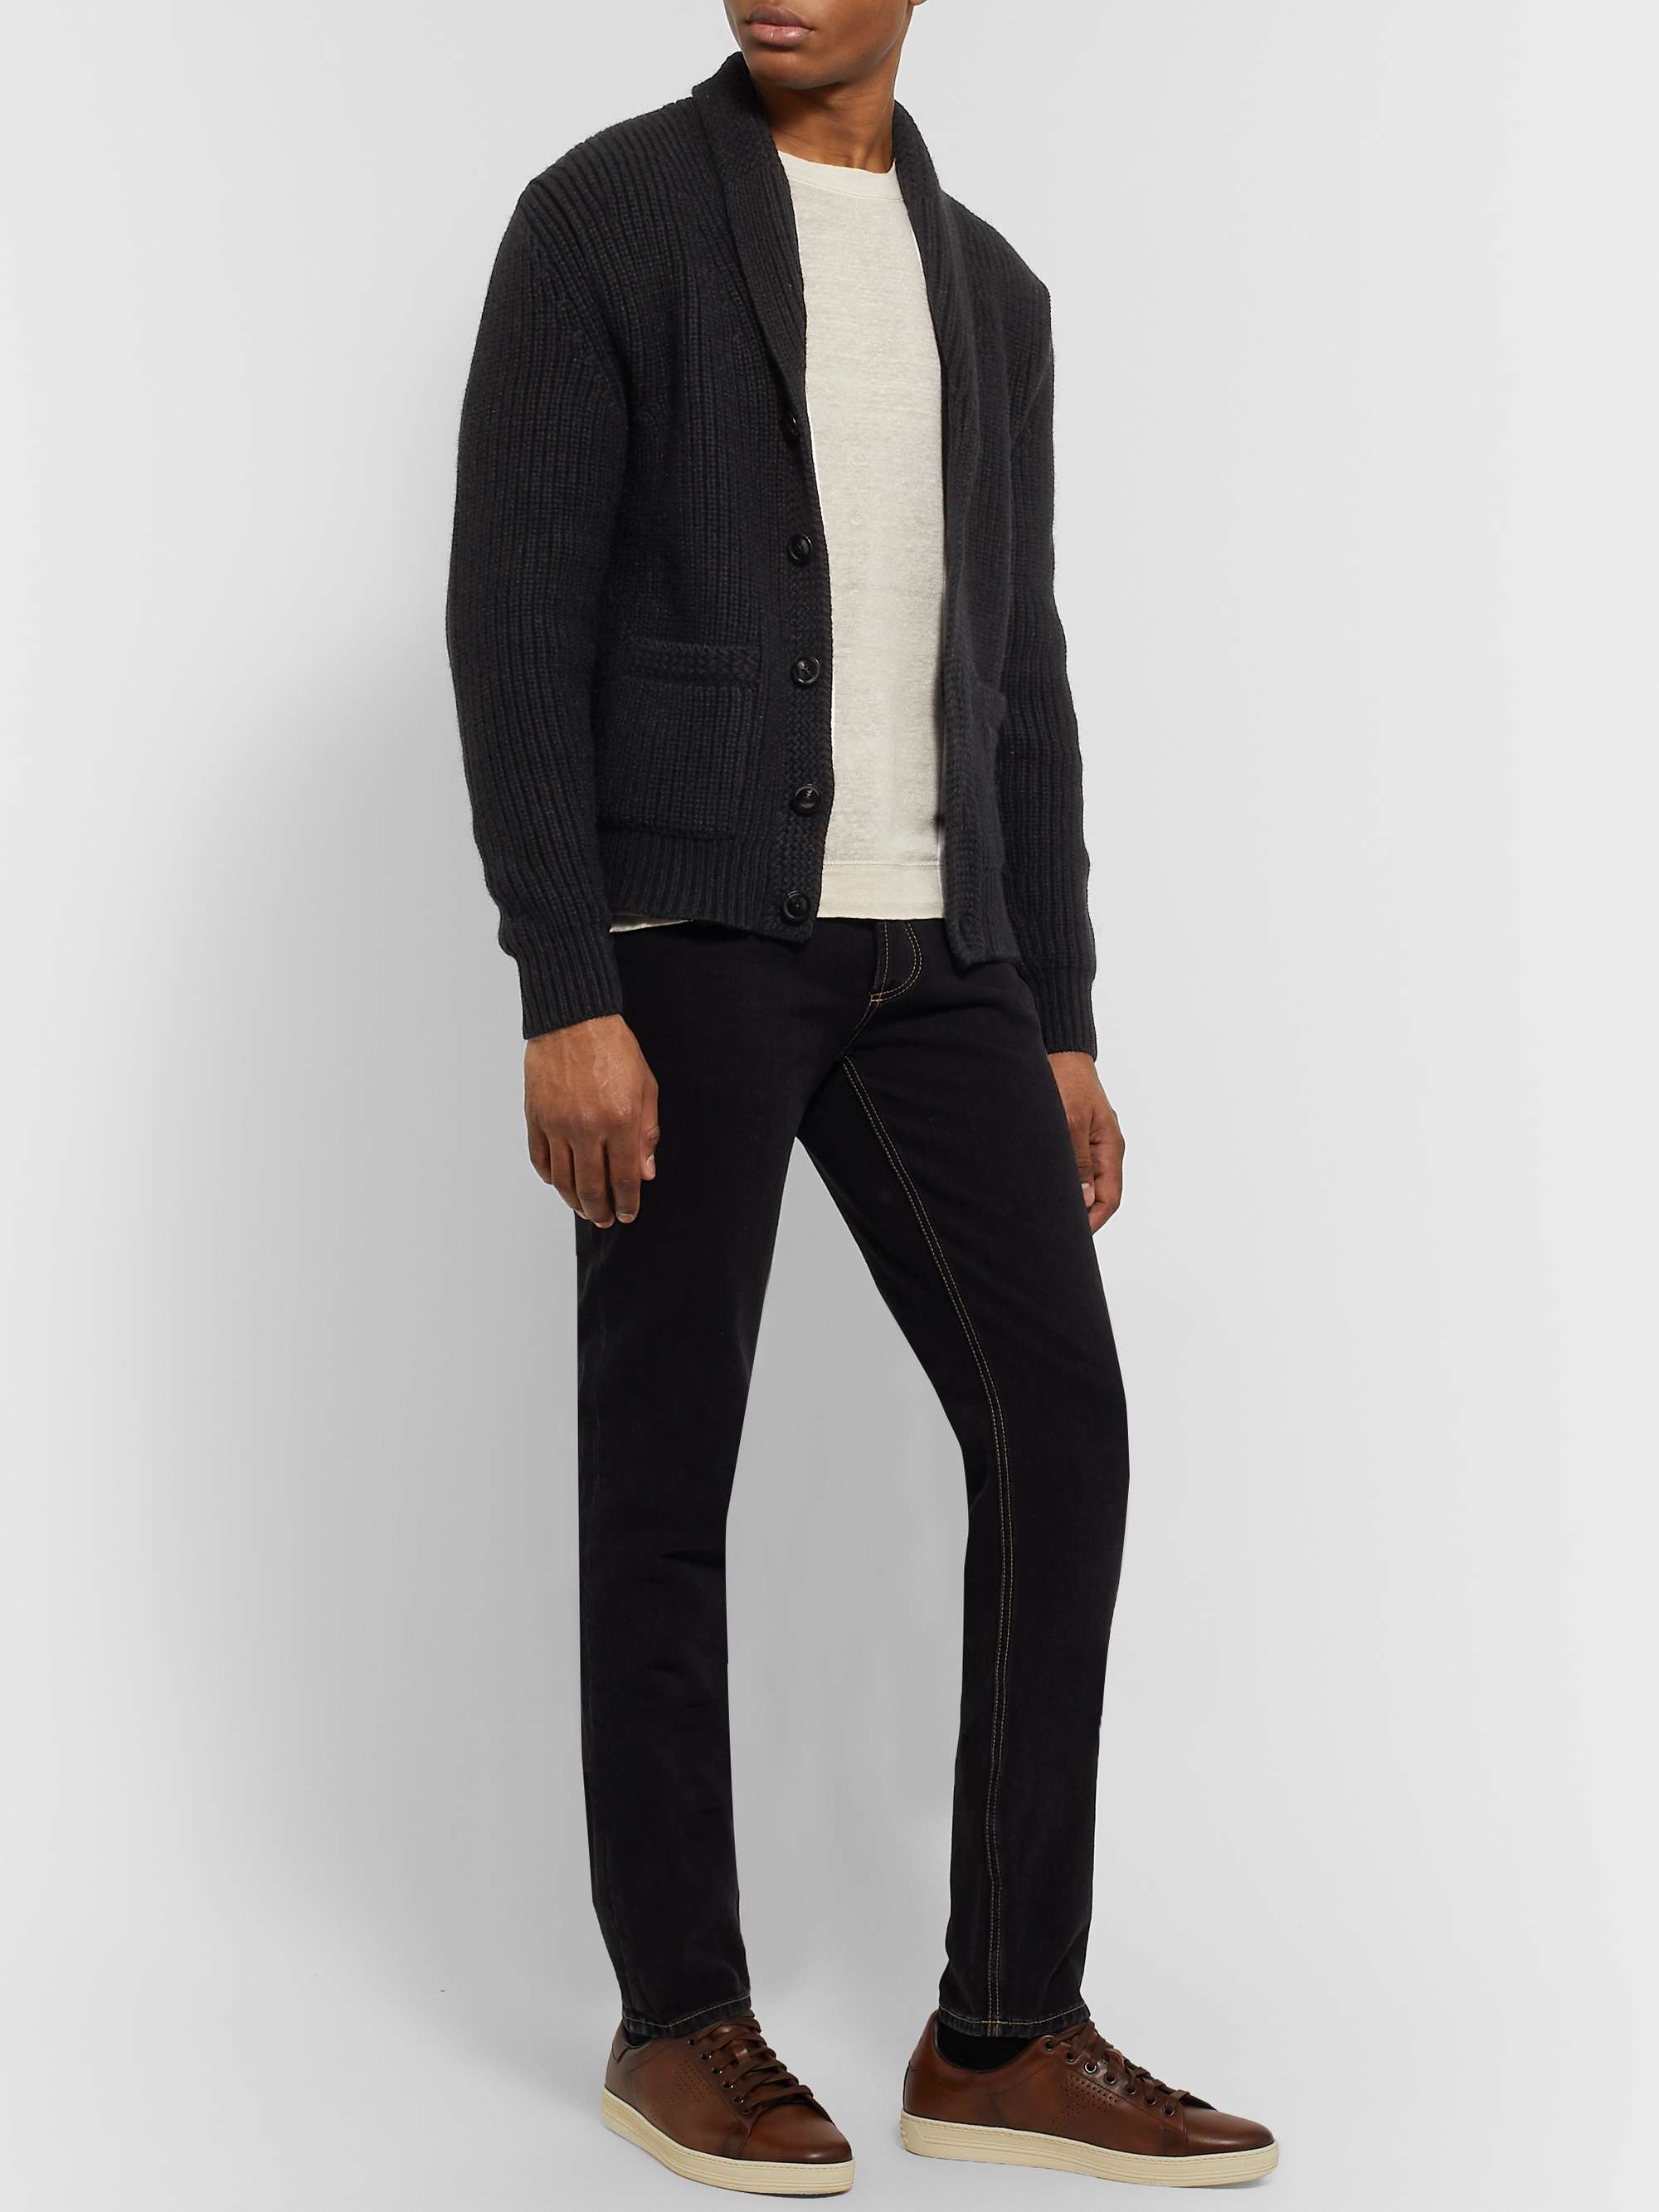 TOM FORD Shawl-Collar Cable-Knit Cashmere and Mohair-Blend Cardigan | MR  PORTER